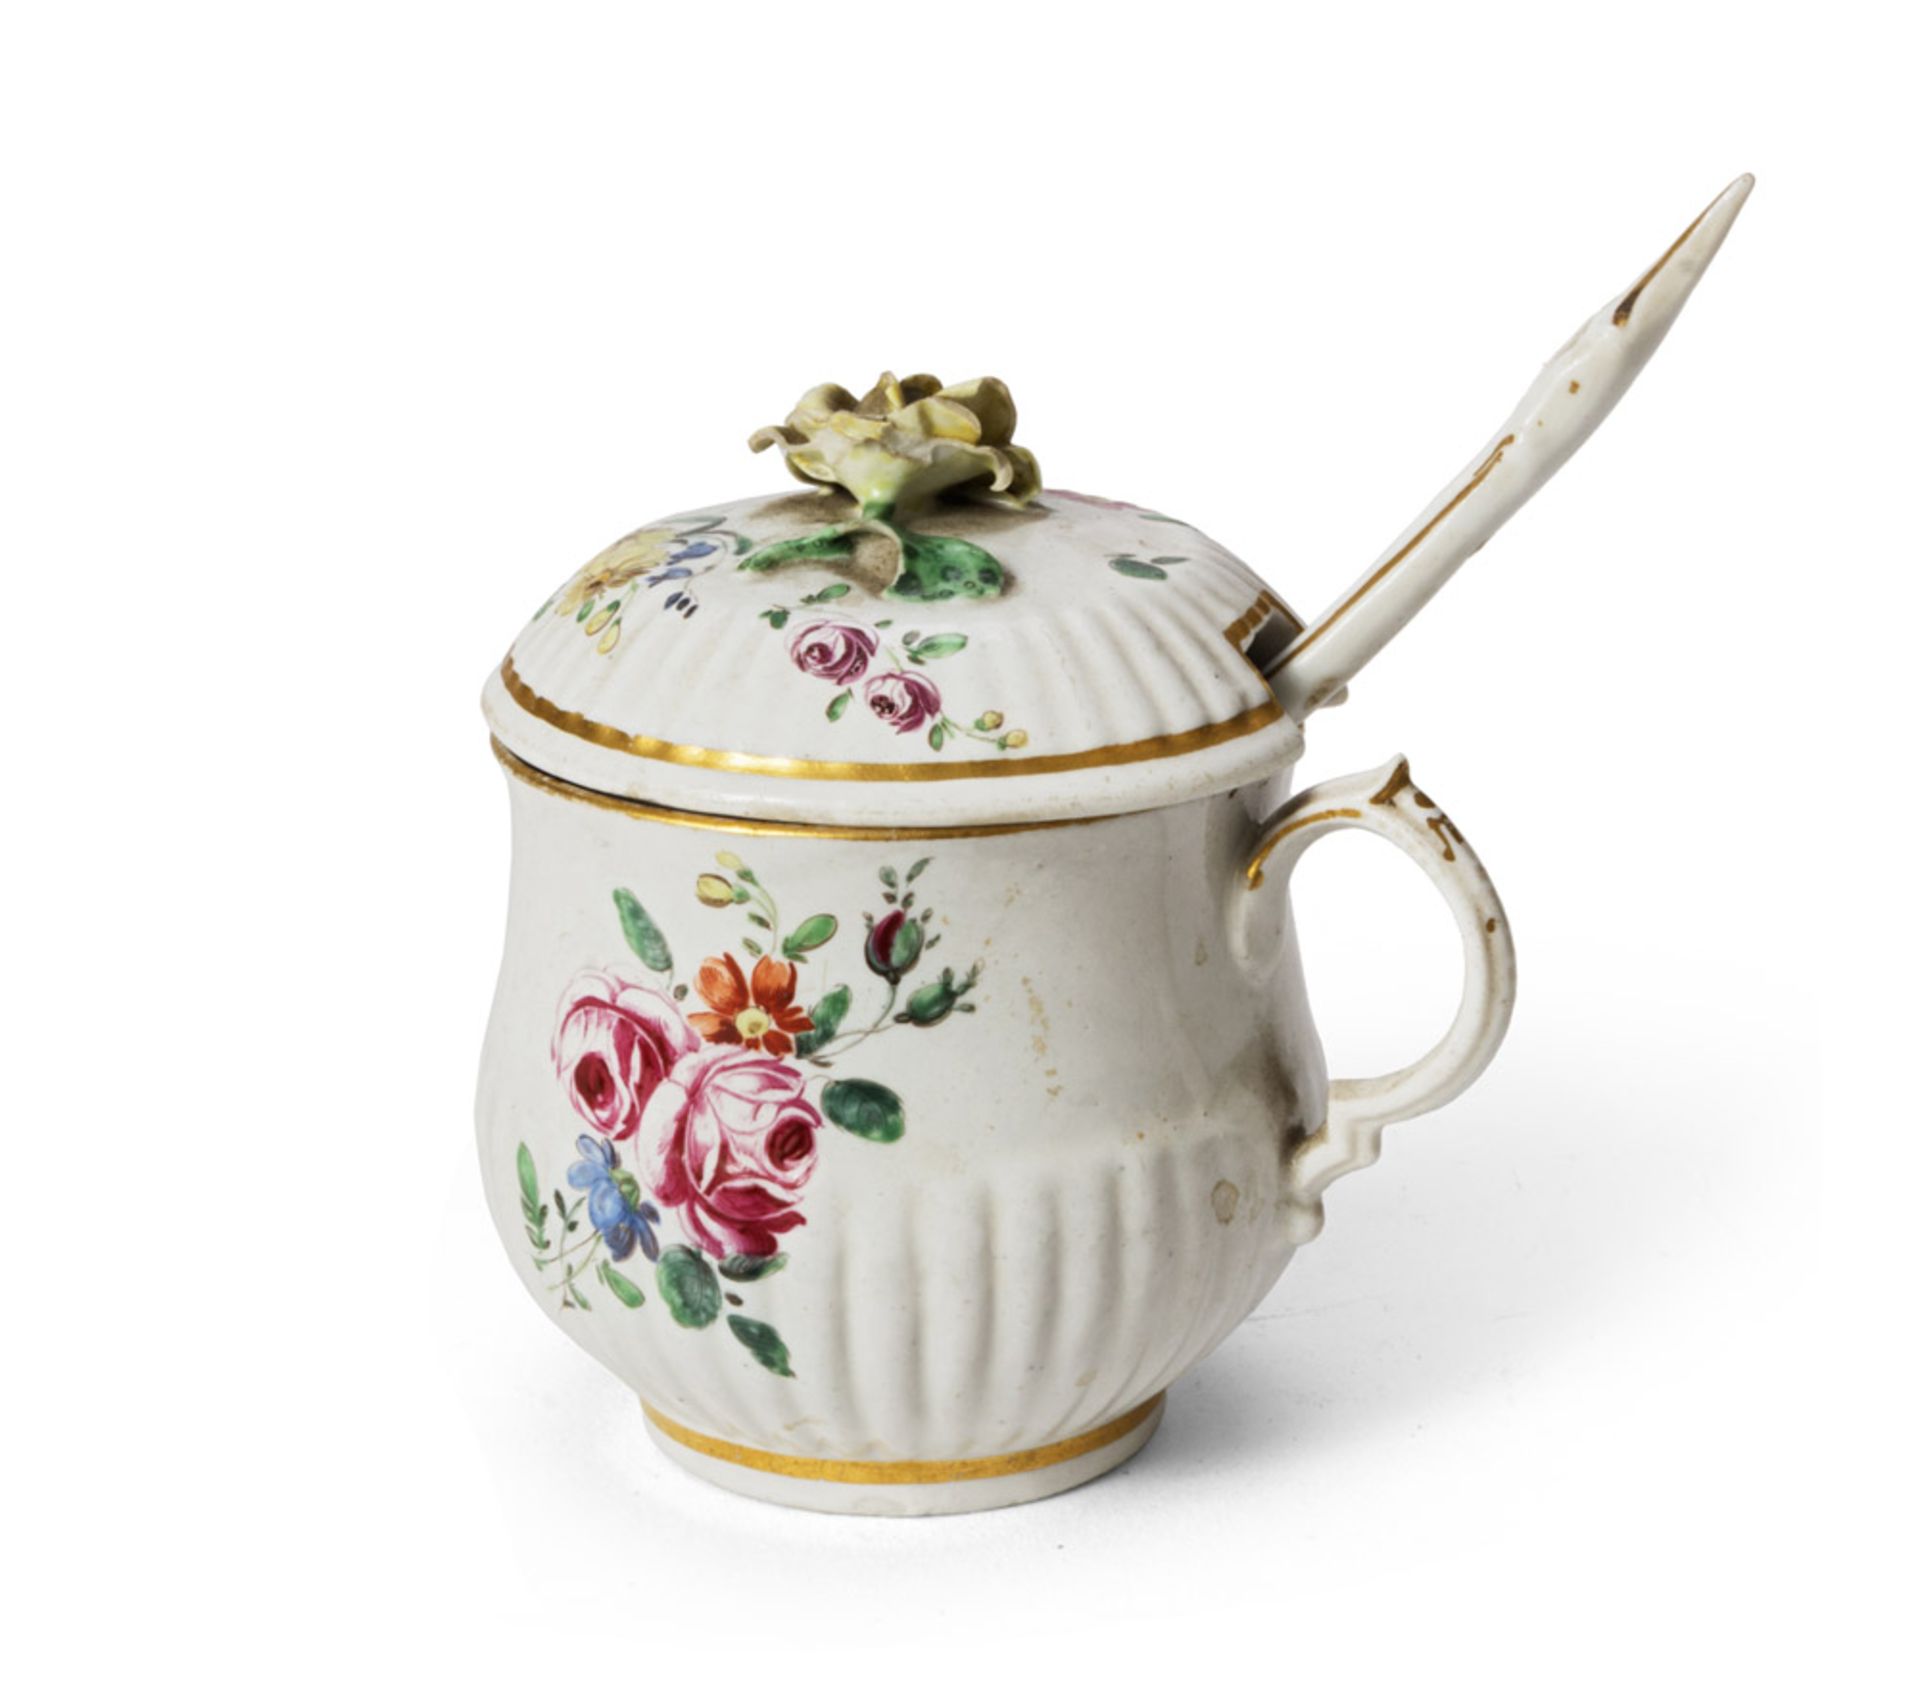 PORCELAIN MUSTARD POT IN, PROBABLY DOCCIA LATE 18TH CENTURY of white enamel and polychromy,